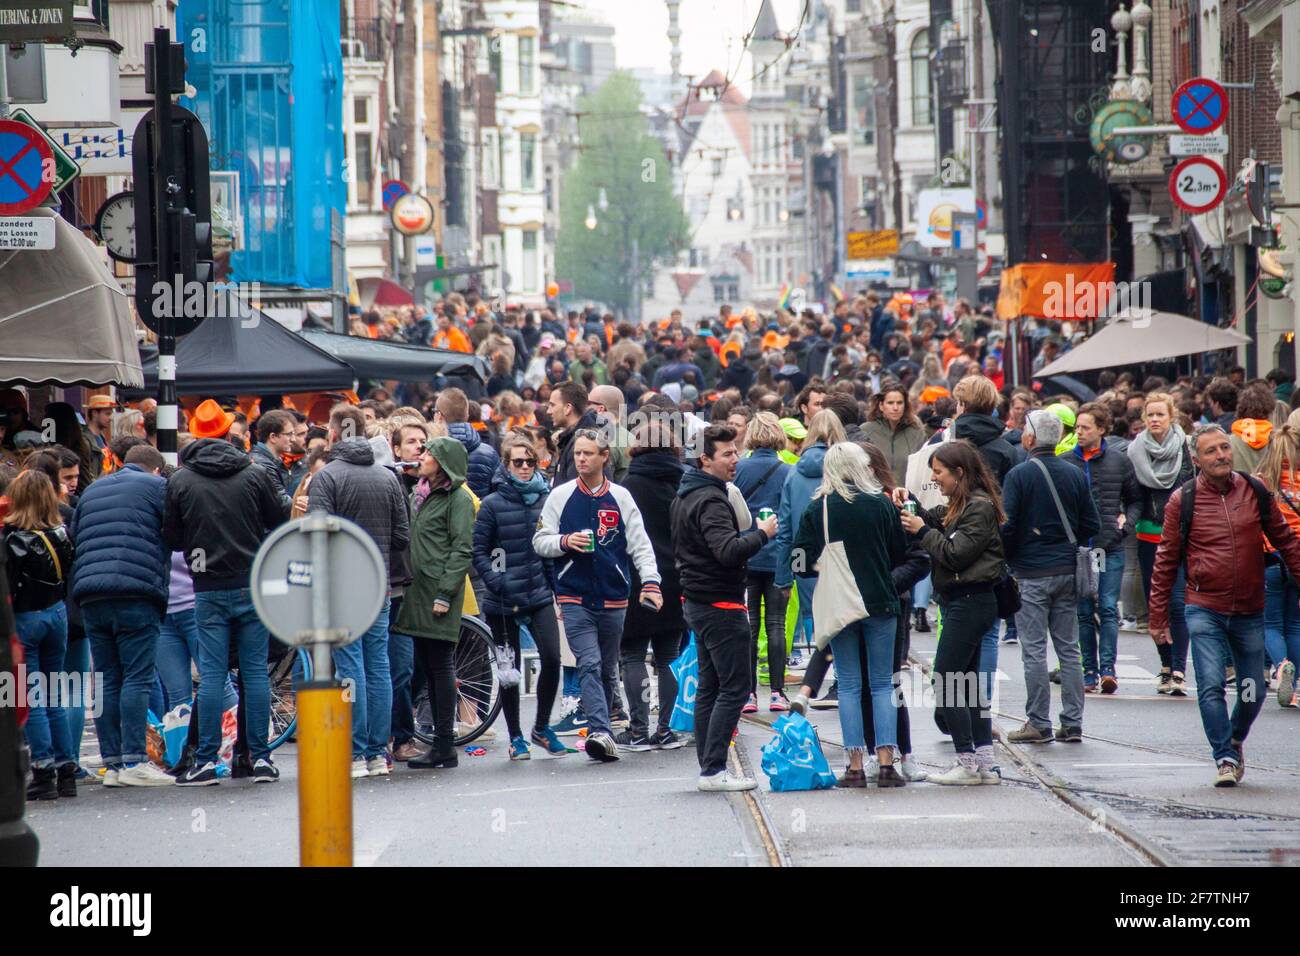 Amsterdam, The Netherlands - April 27, 2019: Crowds during Kings day pre corona. Stock Photo